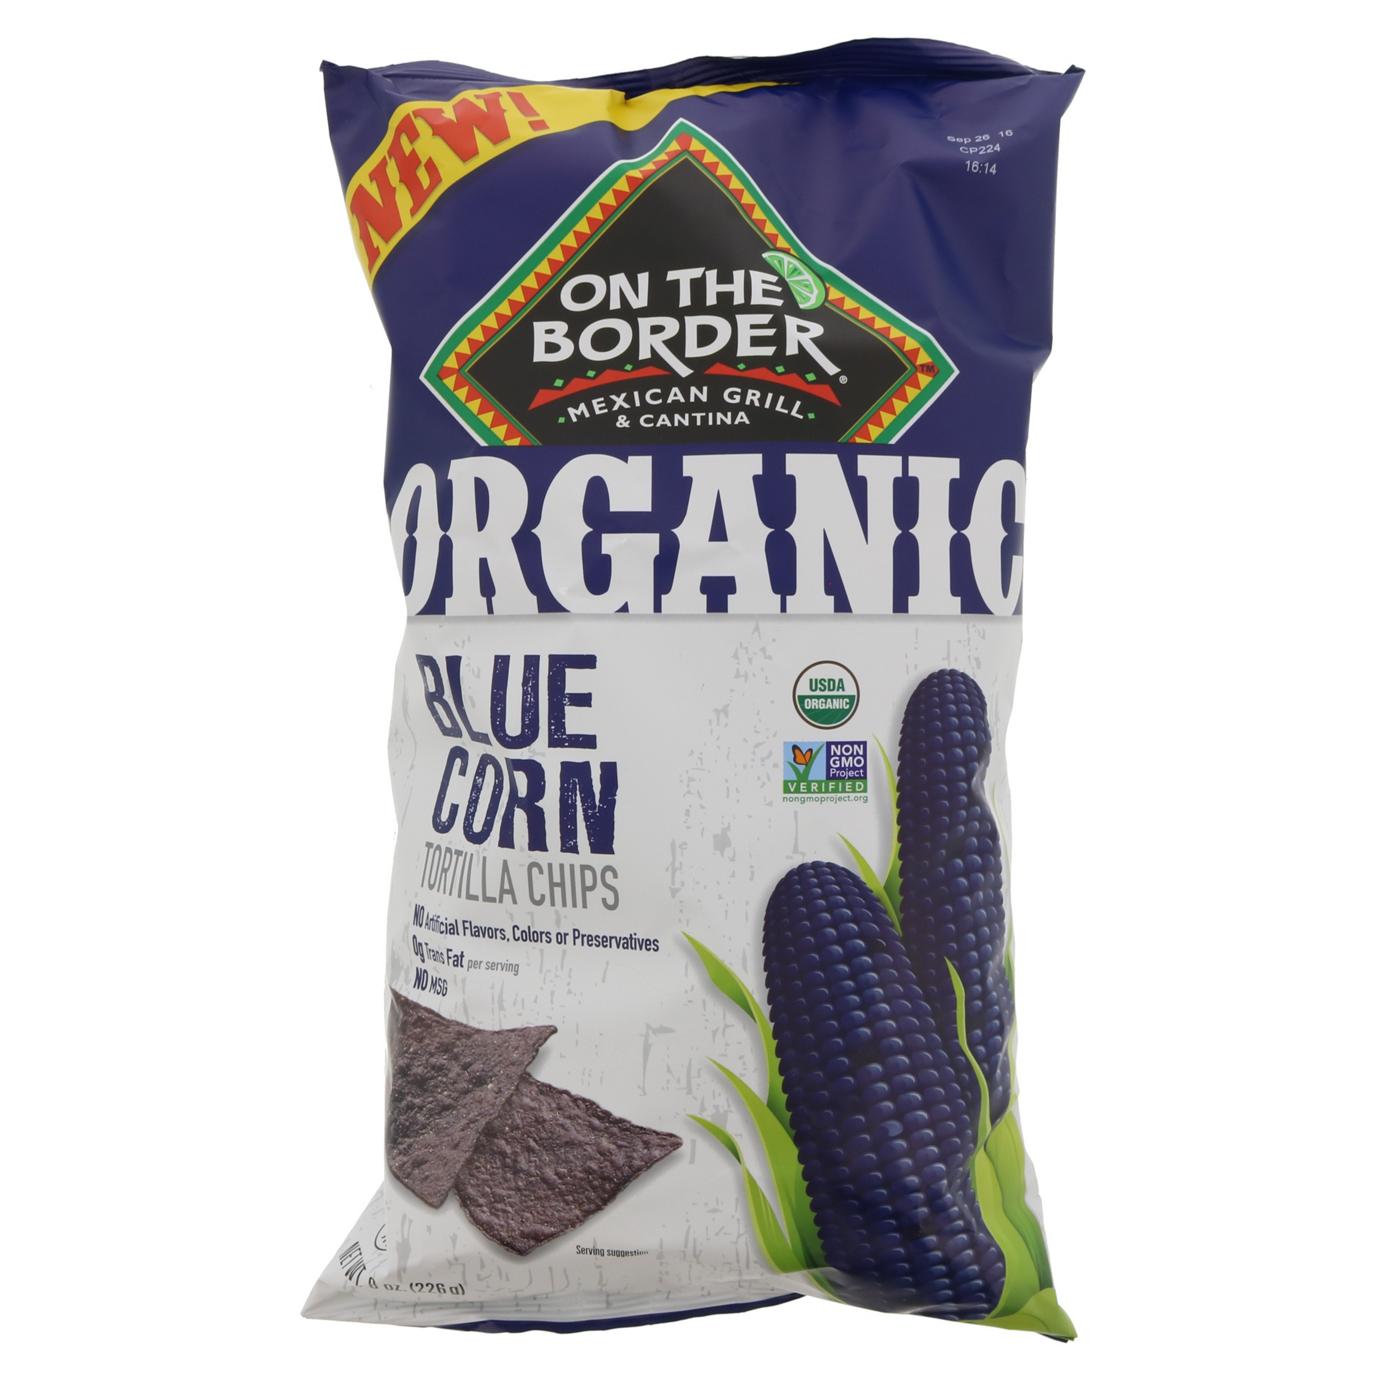 On The Border Organic Blue Corn Tortilla Chips; image 1 of 2